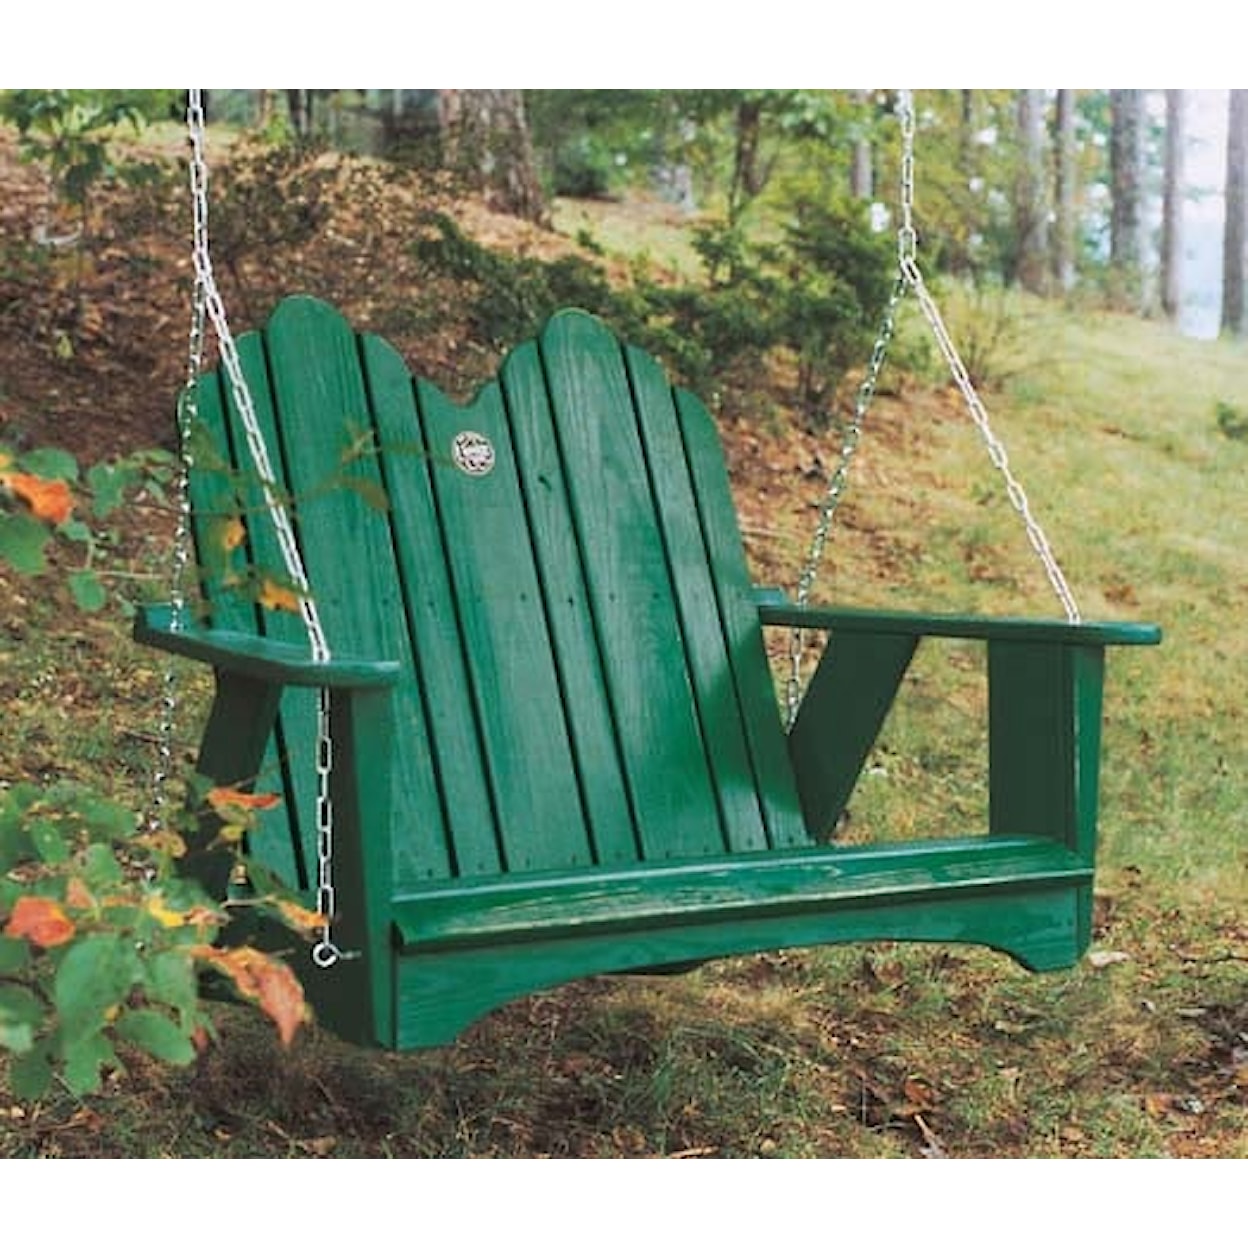 Uwharrie Chair The Original Collection The Original Swing